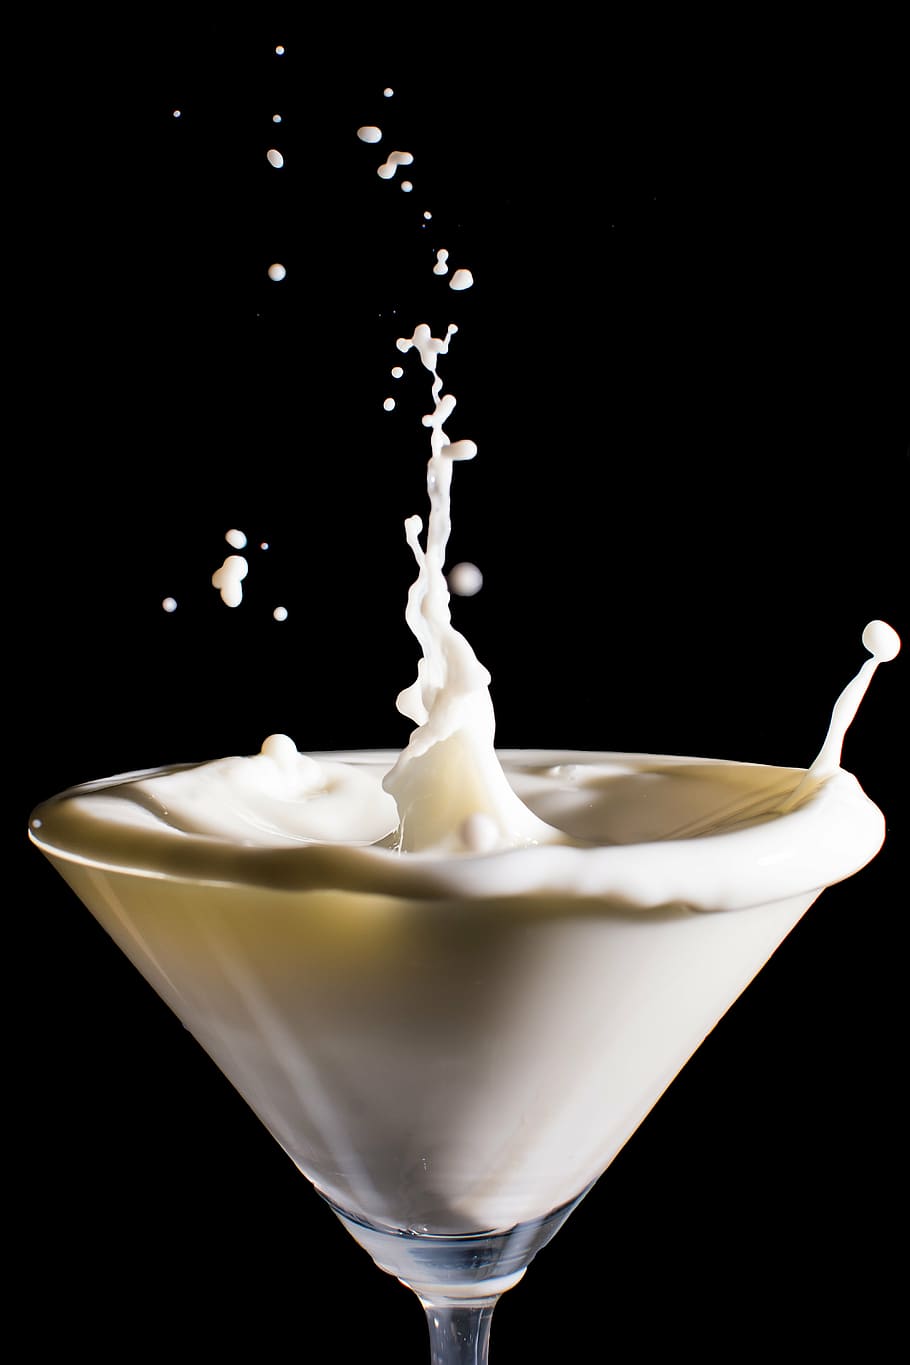 milk, the moment, a snapshot, flash, food and drink, refreshment, HD wallpaper